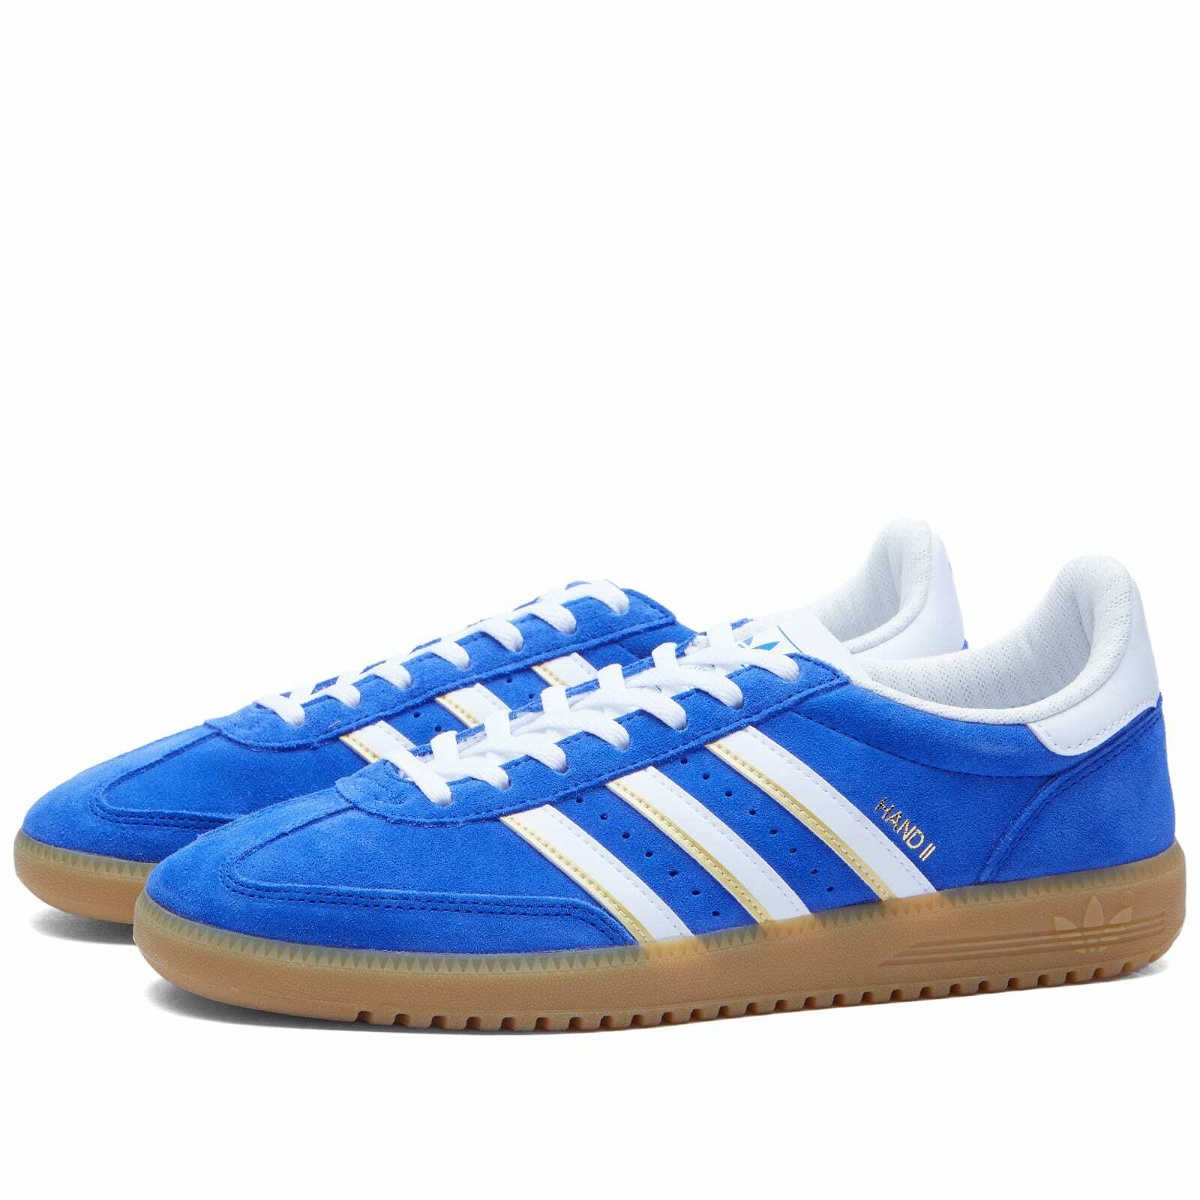 Adidas Hand 2 Sneakers in Semi Lucid Blue/White adidas